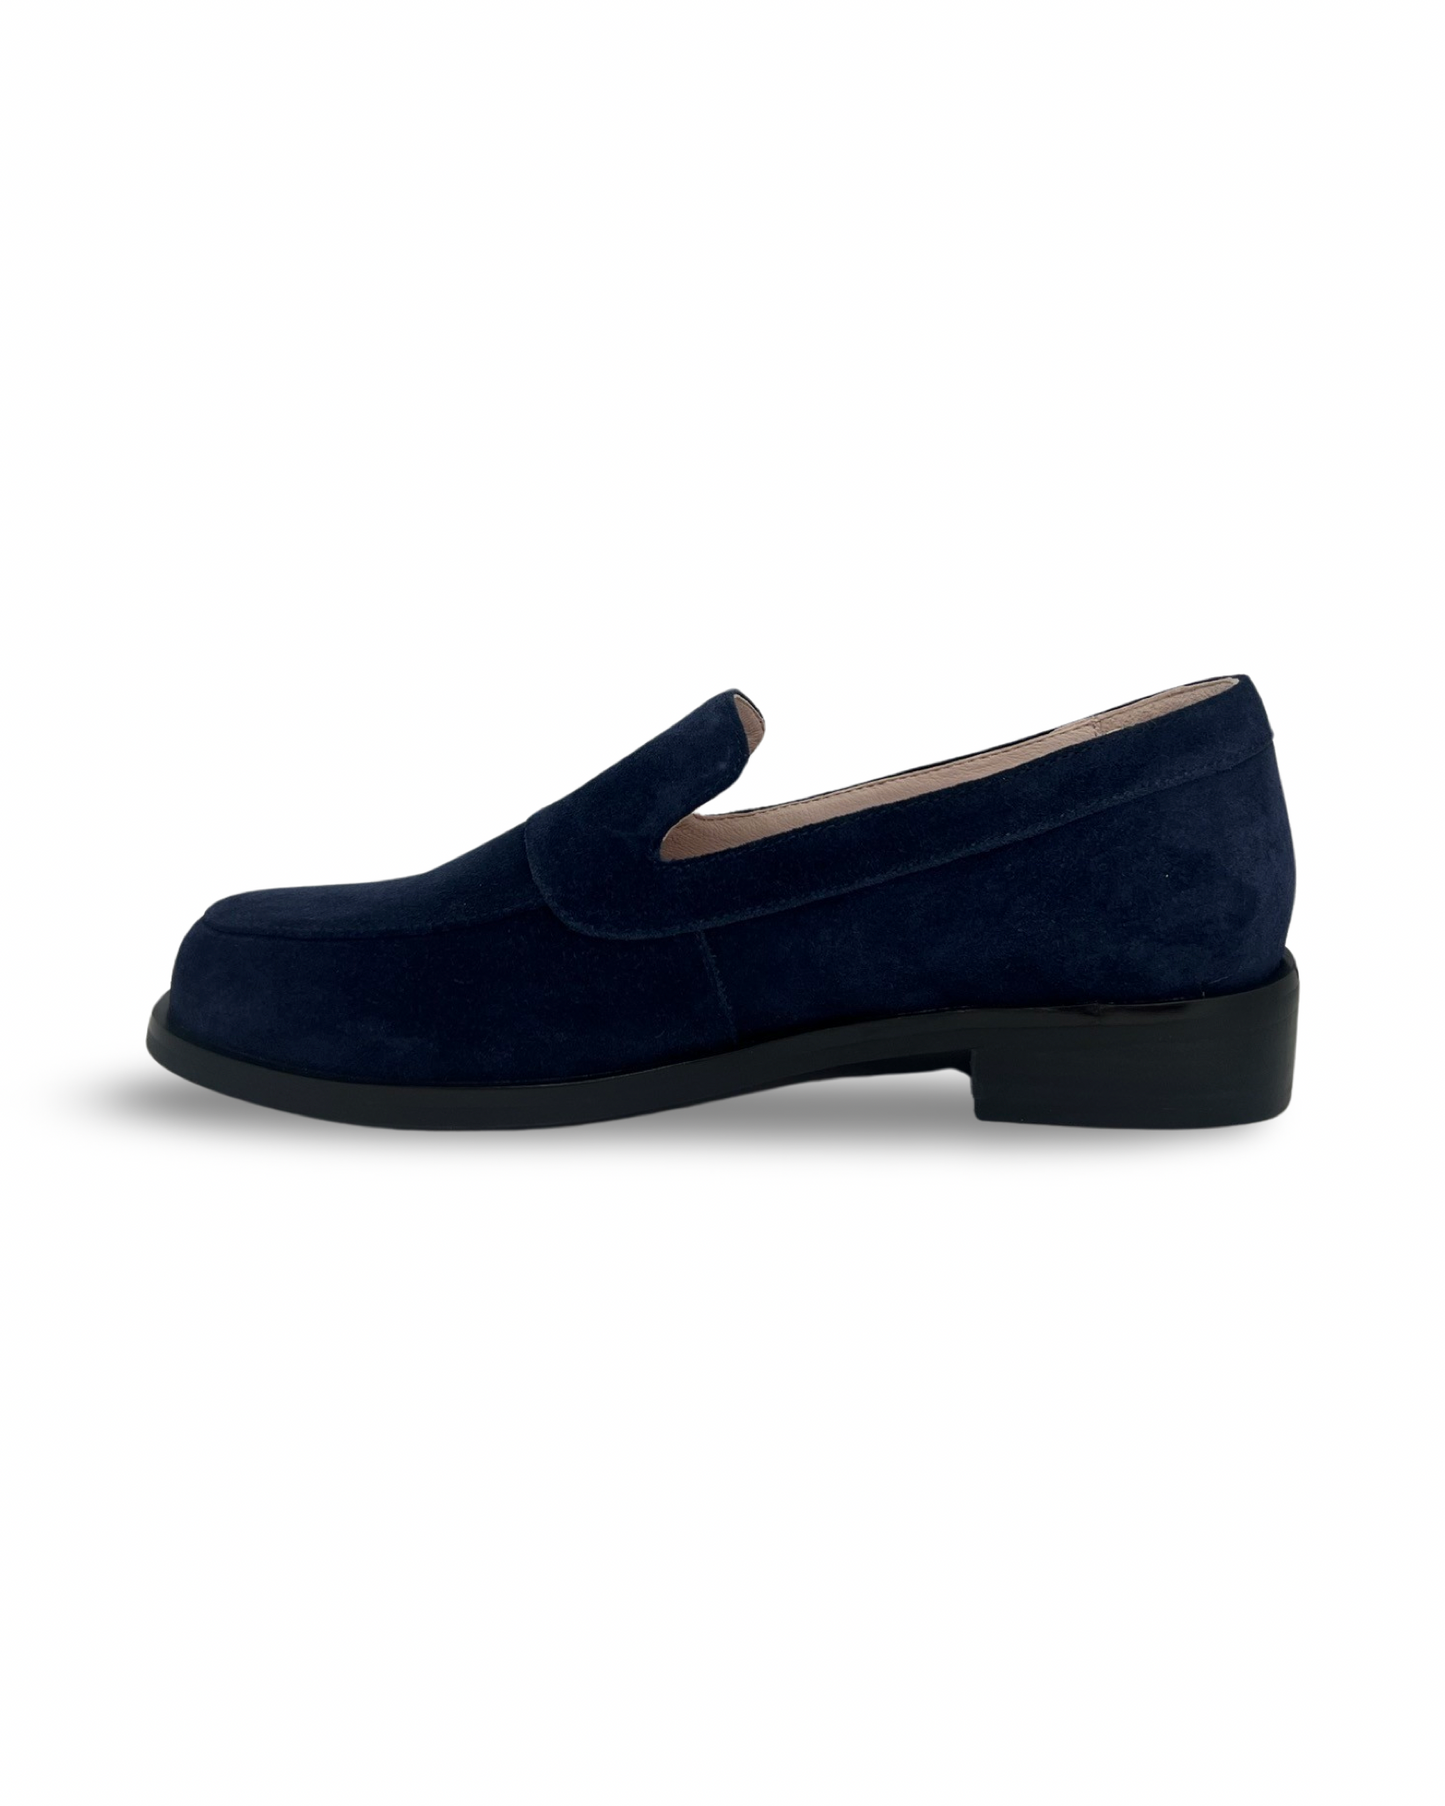 Hudson Loafer By Andrea Biani